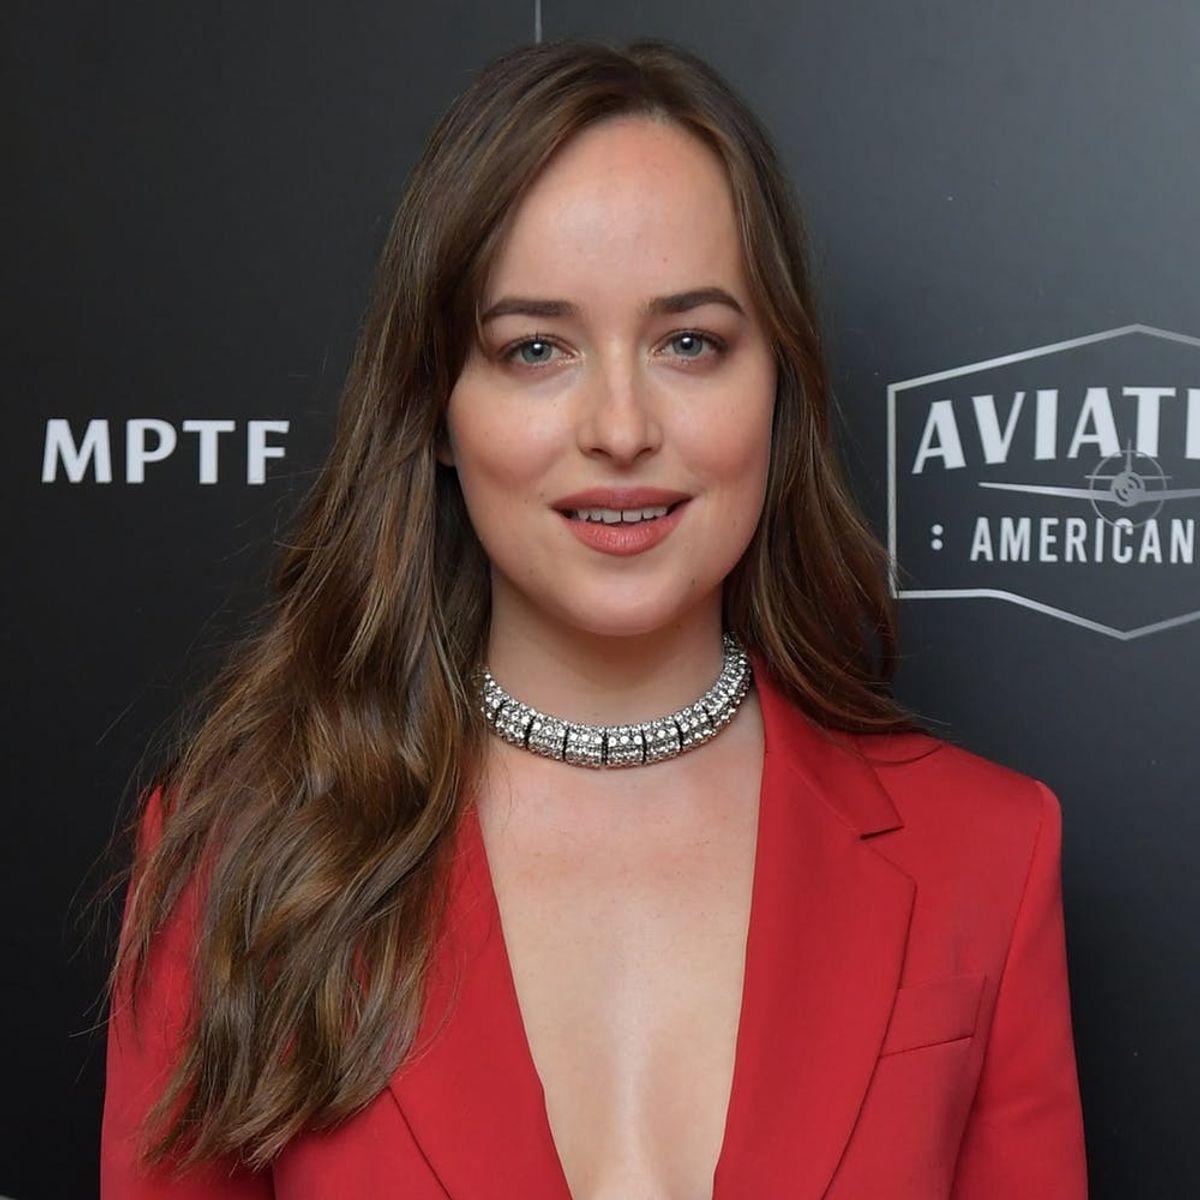 Dakota Johnson Is a Blonde Once More: See Her Sunny Style!